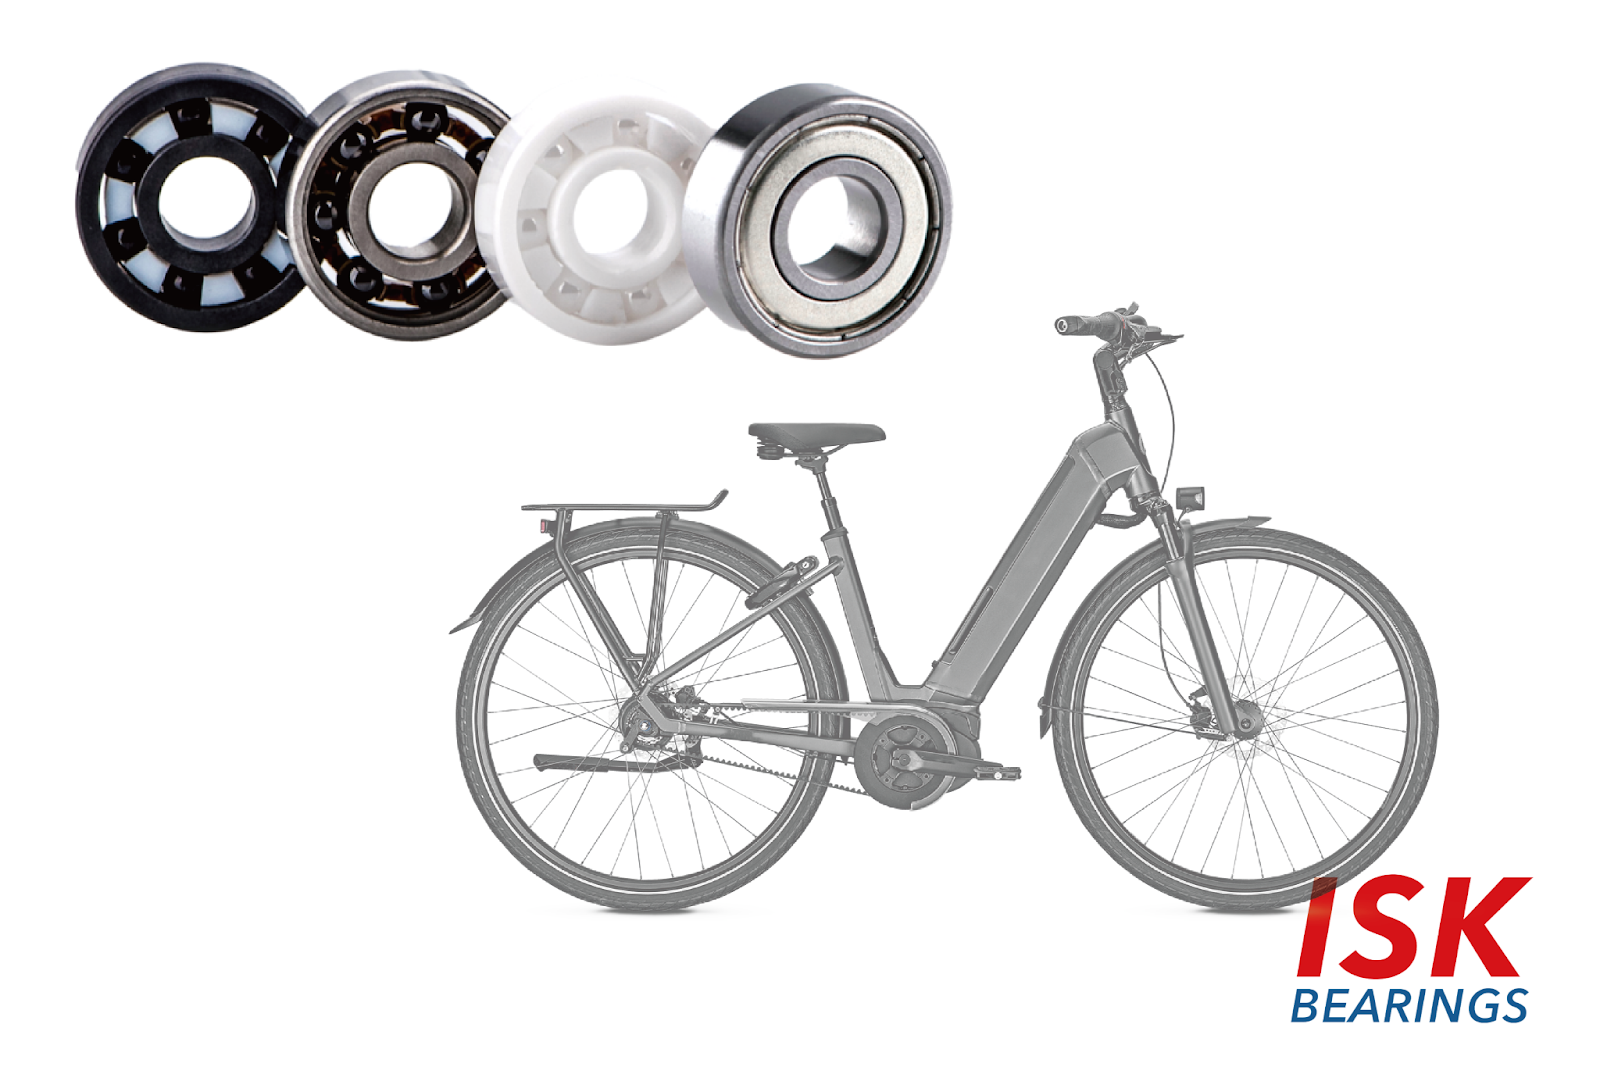 Common Materials Used in Electric Bicycle Bearings